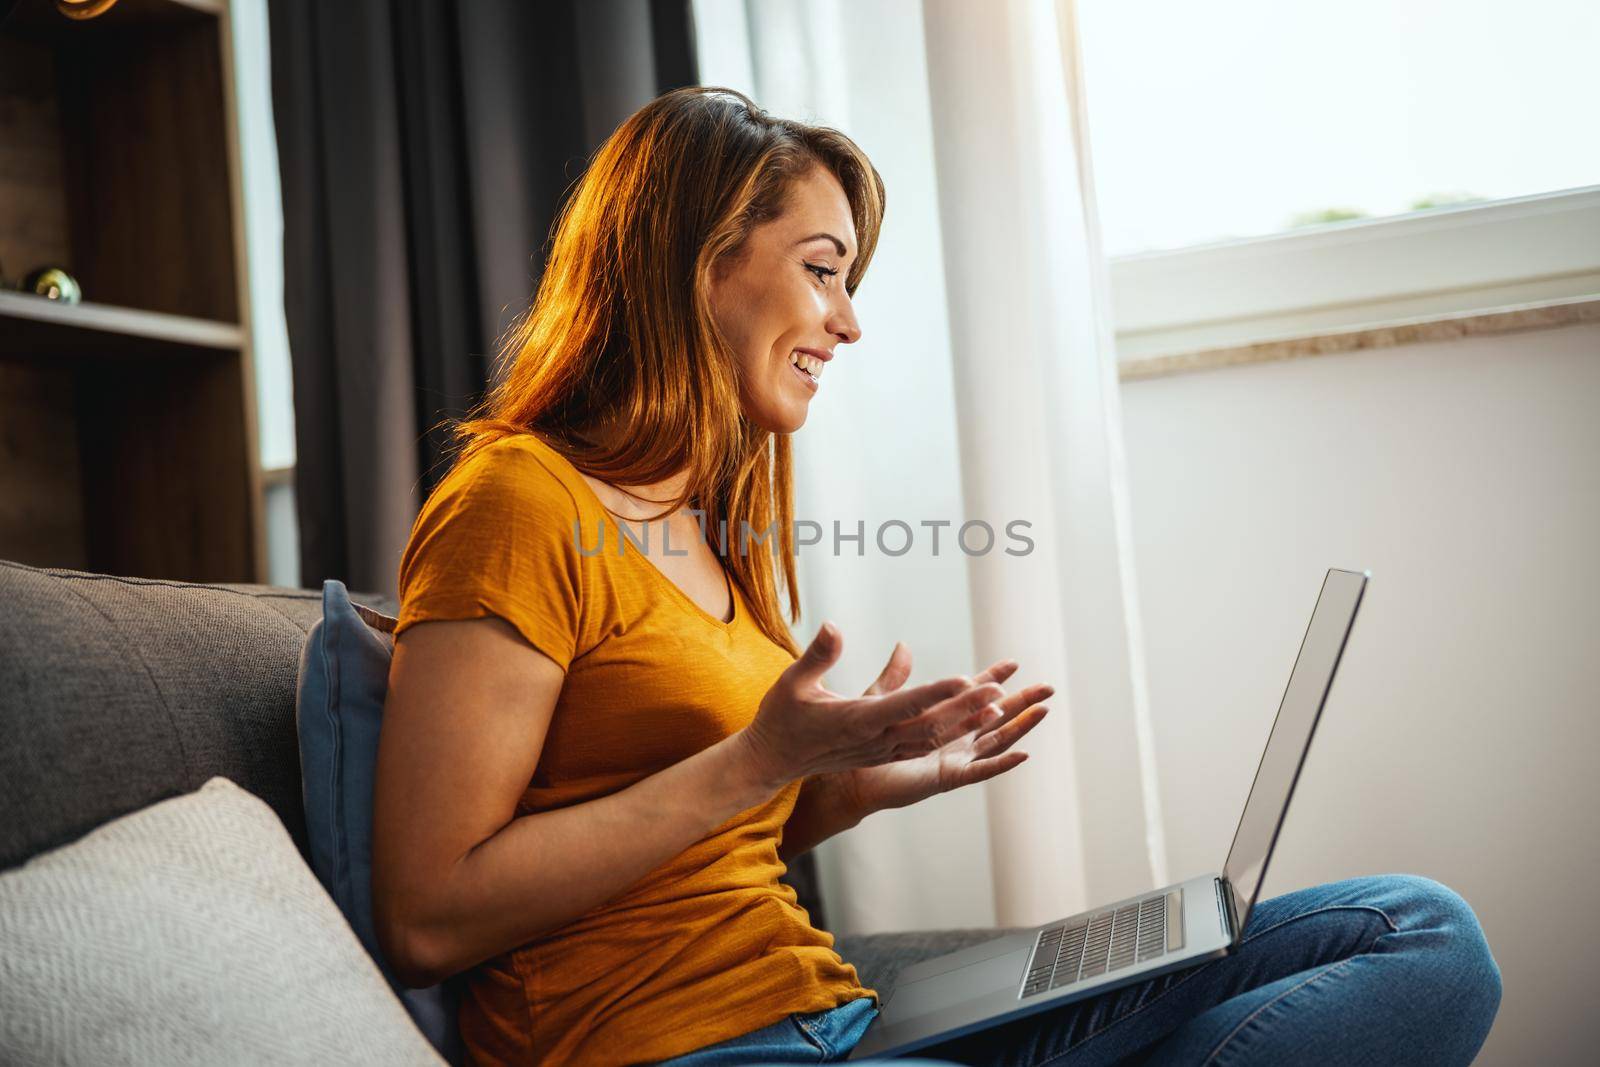 Attractive young woman sitting cross legged on the sofa and using her laptop to make a video chat with someone at home.